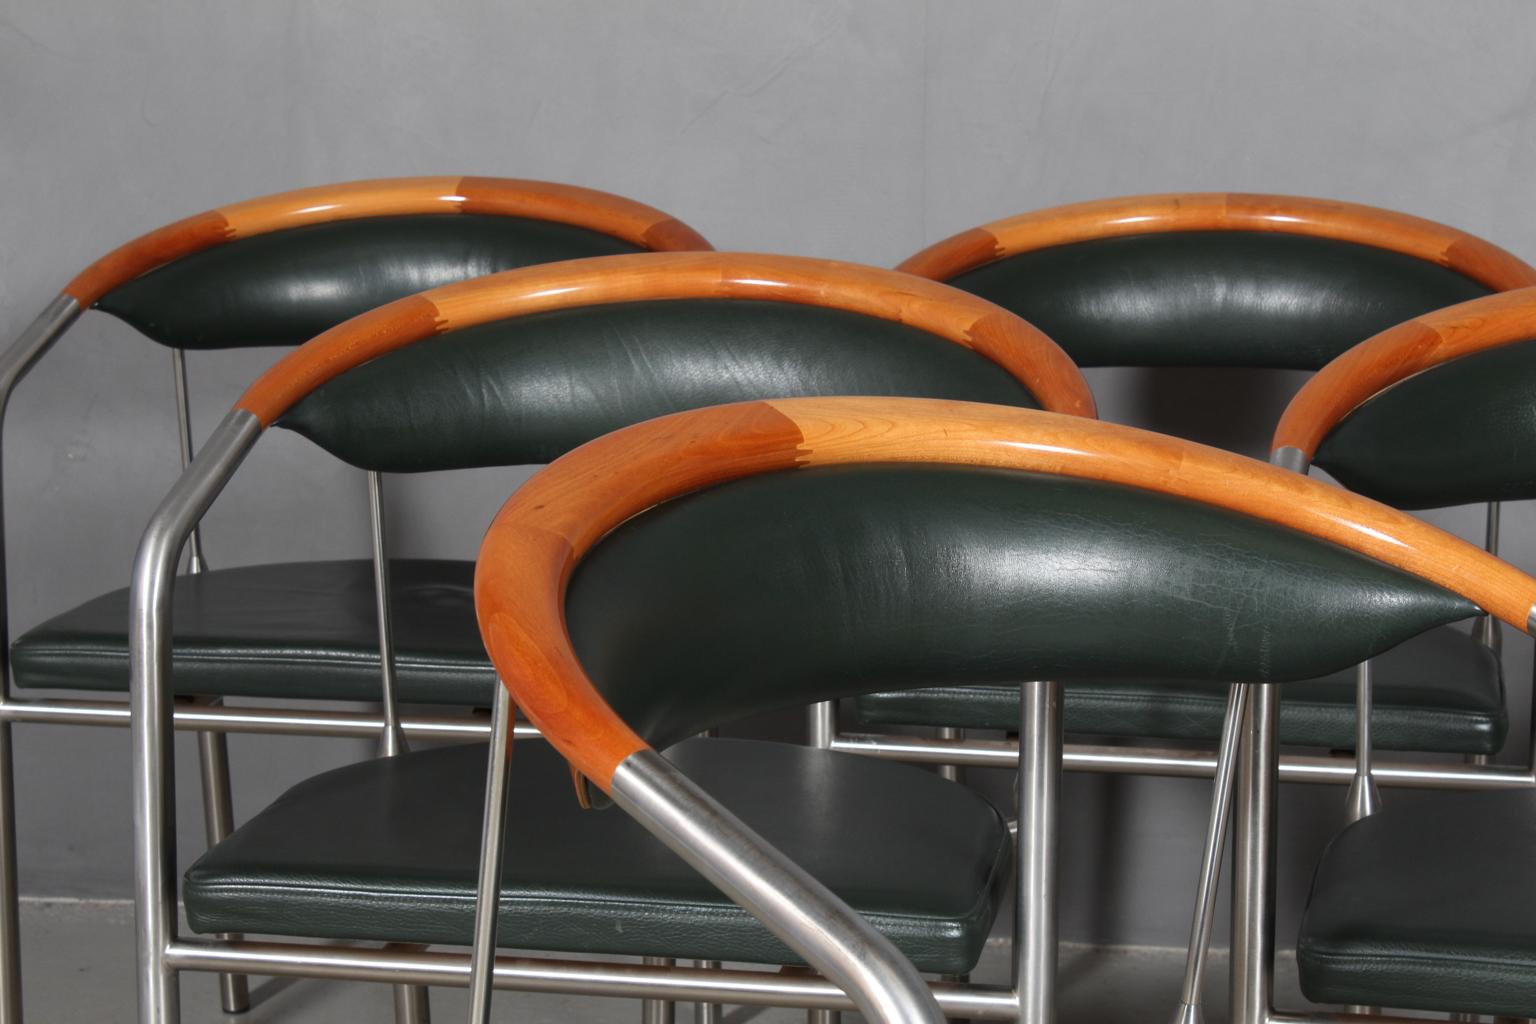 Henrik Tengler armchairs in steel and backrest of cherry.

Upholstered with racing green leather.

Made by Hansen & Sørensen.